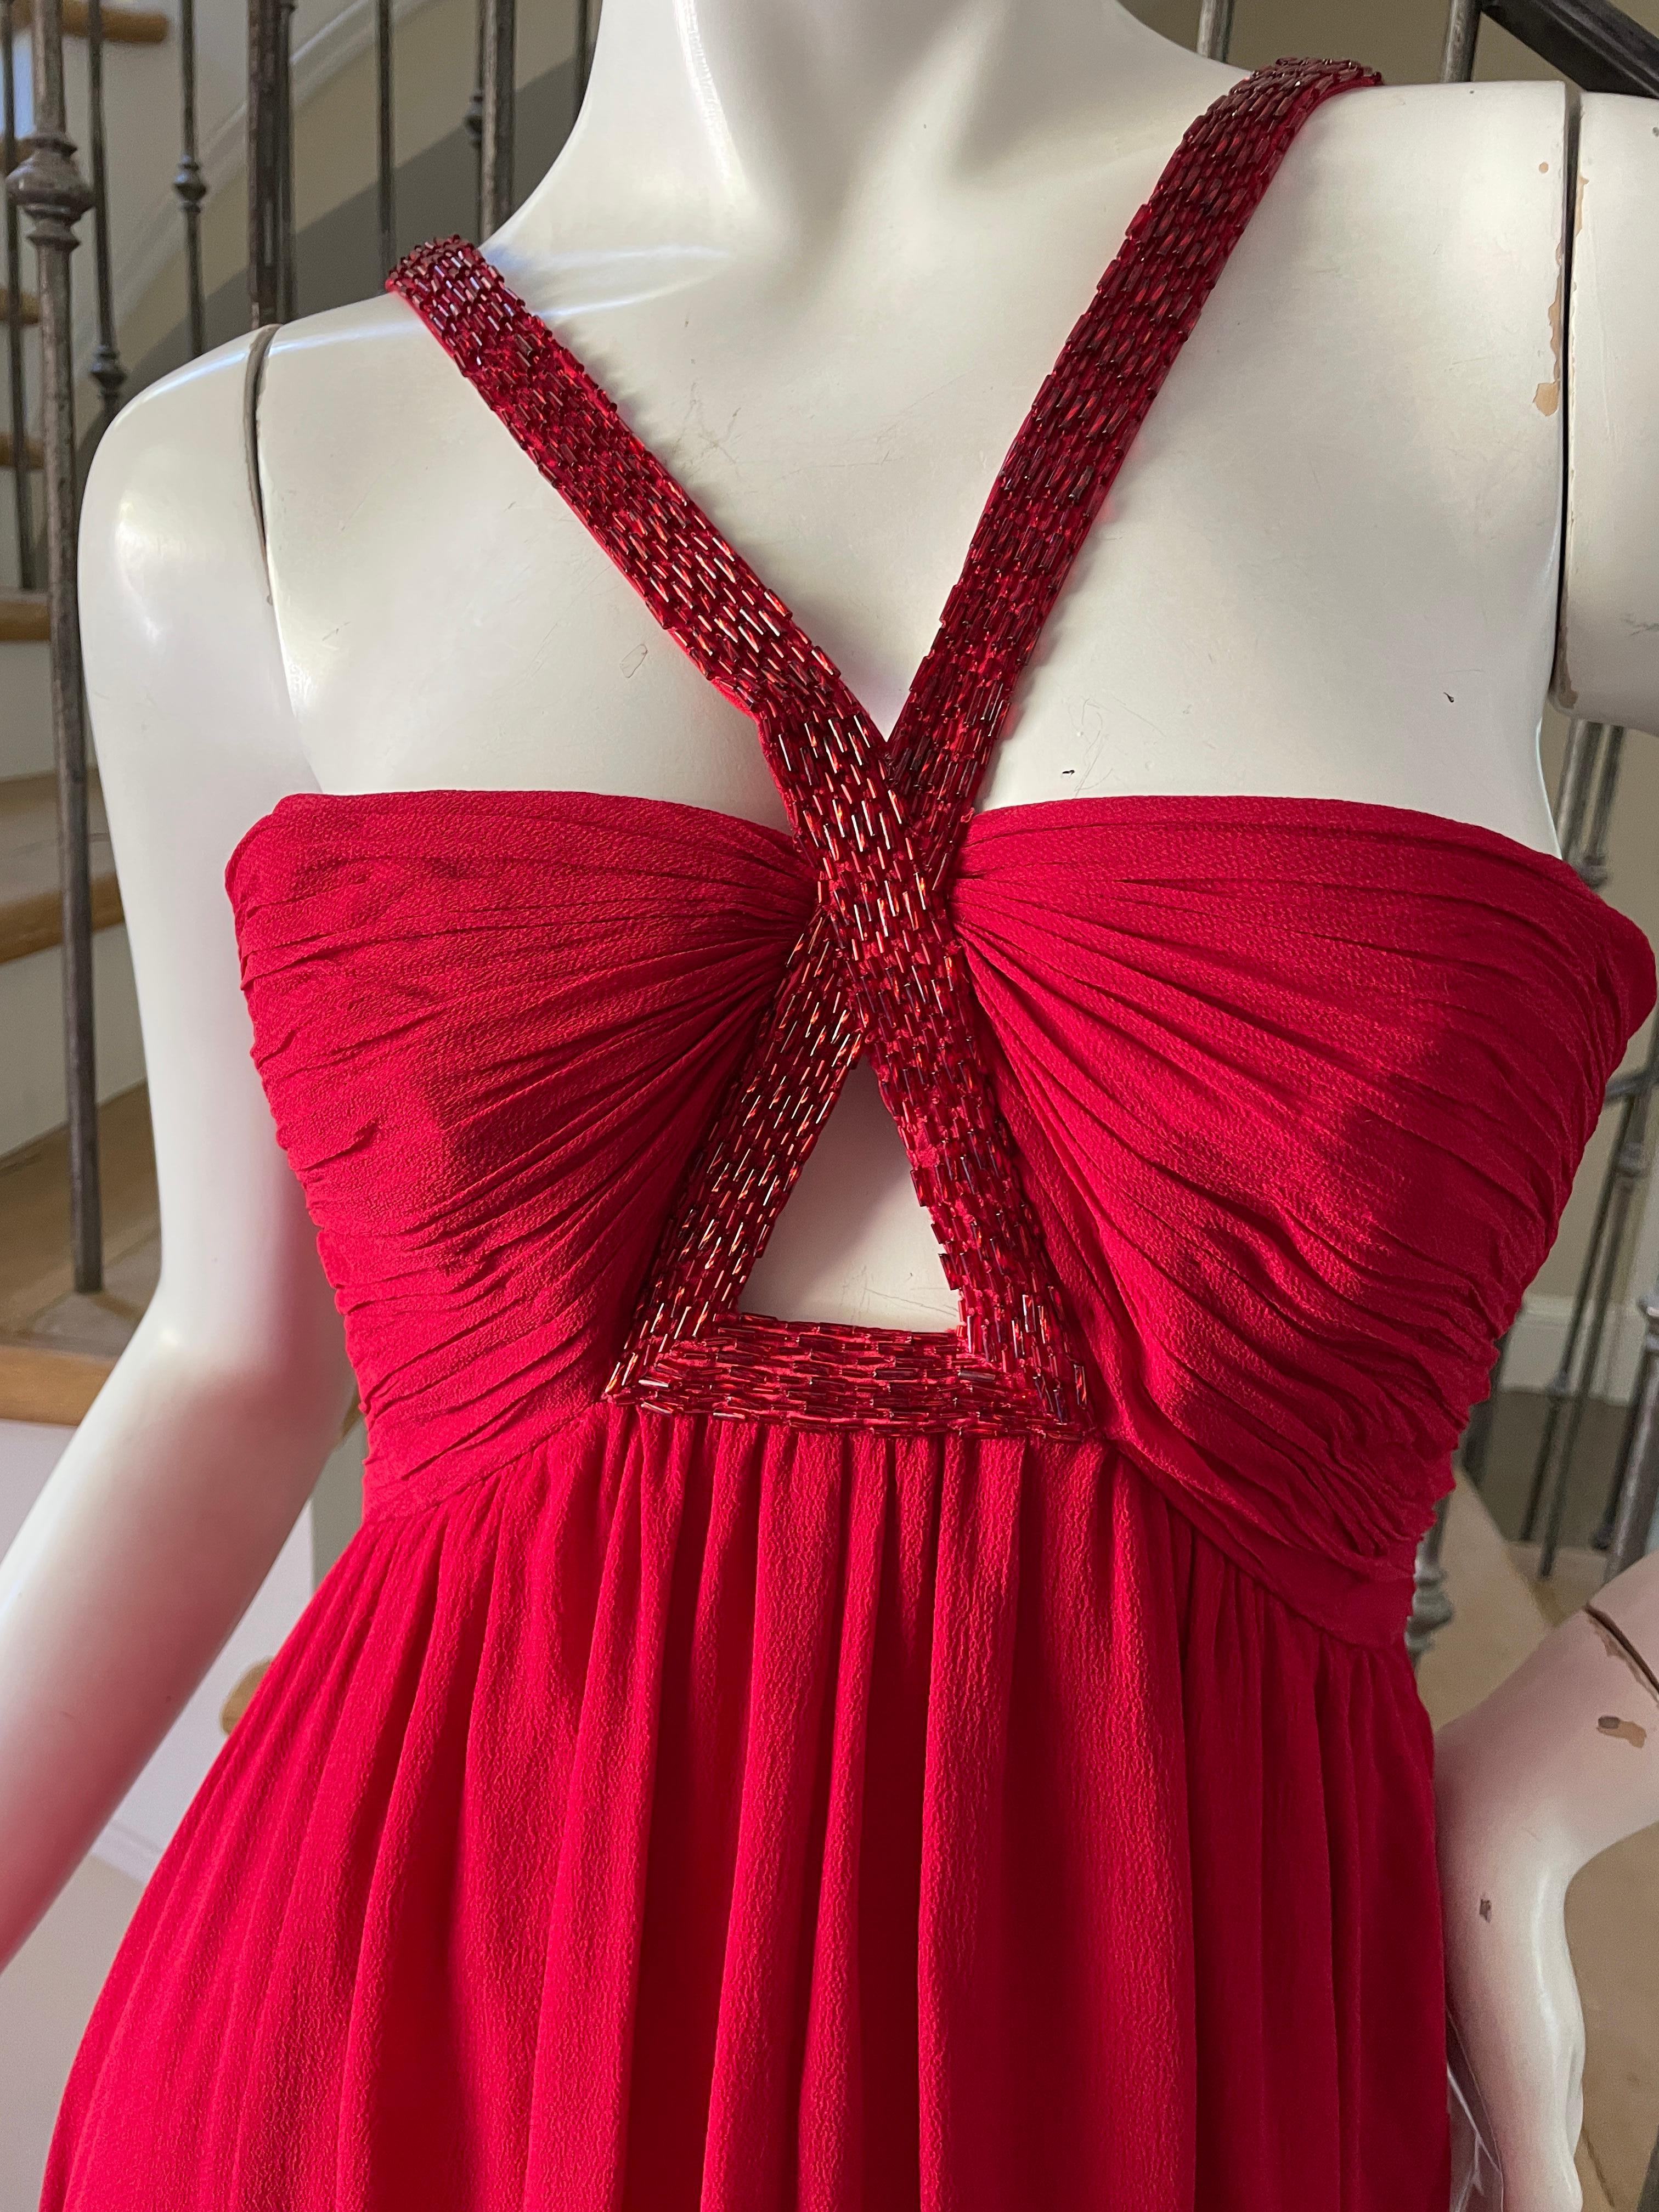 Roberto Cavalli Vintage Coral Red Silk Evening Dress with Keyhole Beaded Details For Sale 4